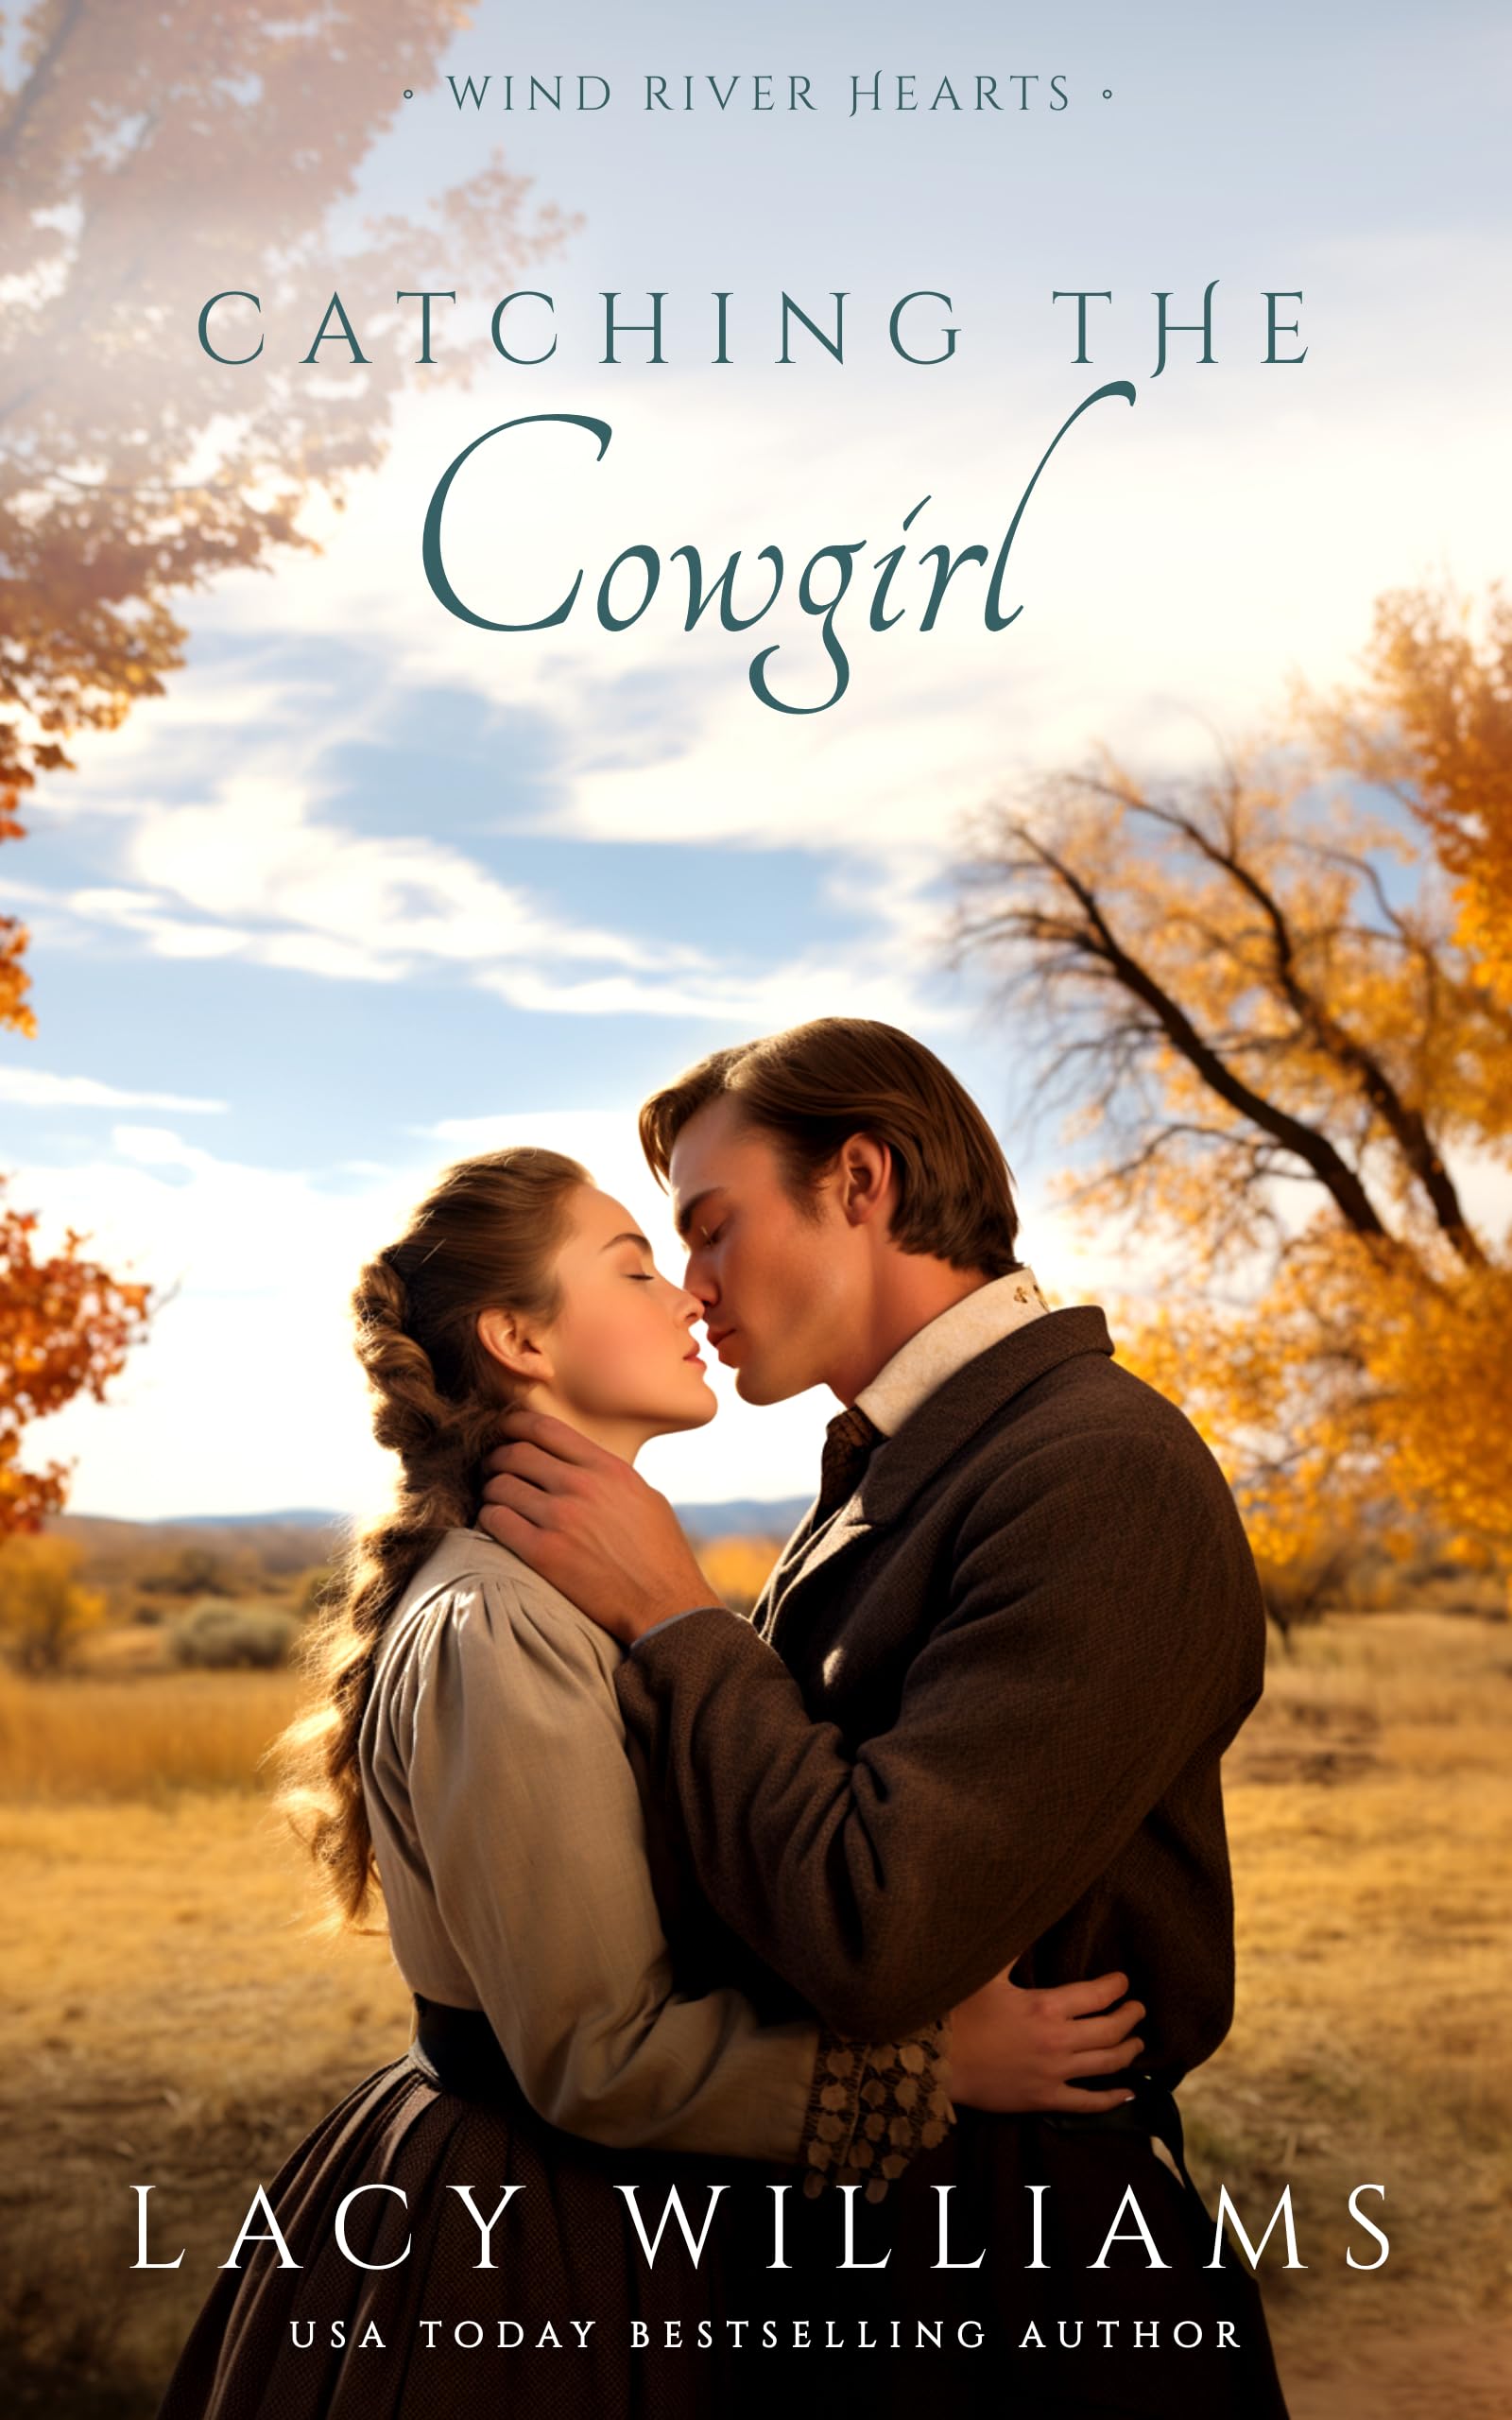 Catching the Cowgirl (Wind River Hearts Book 12)